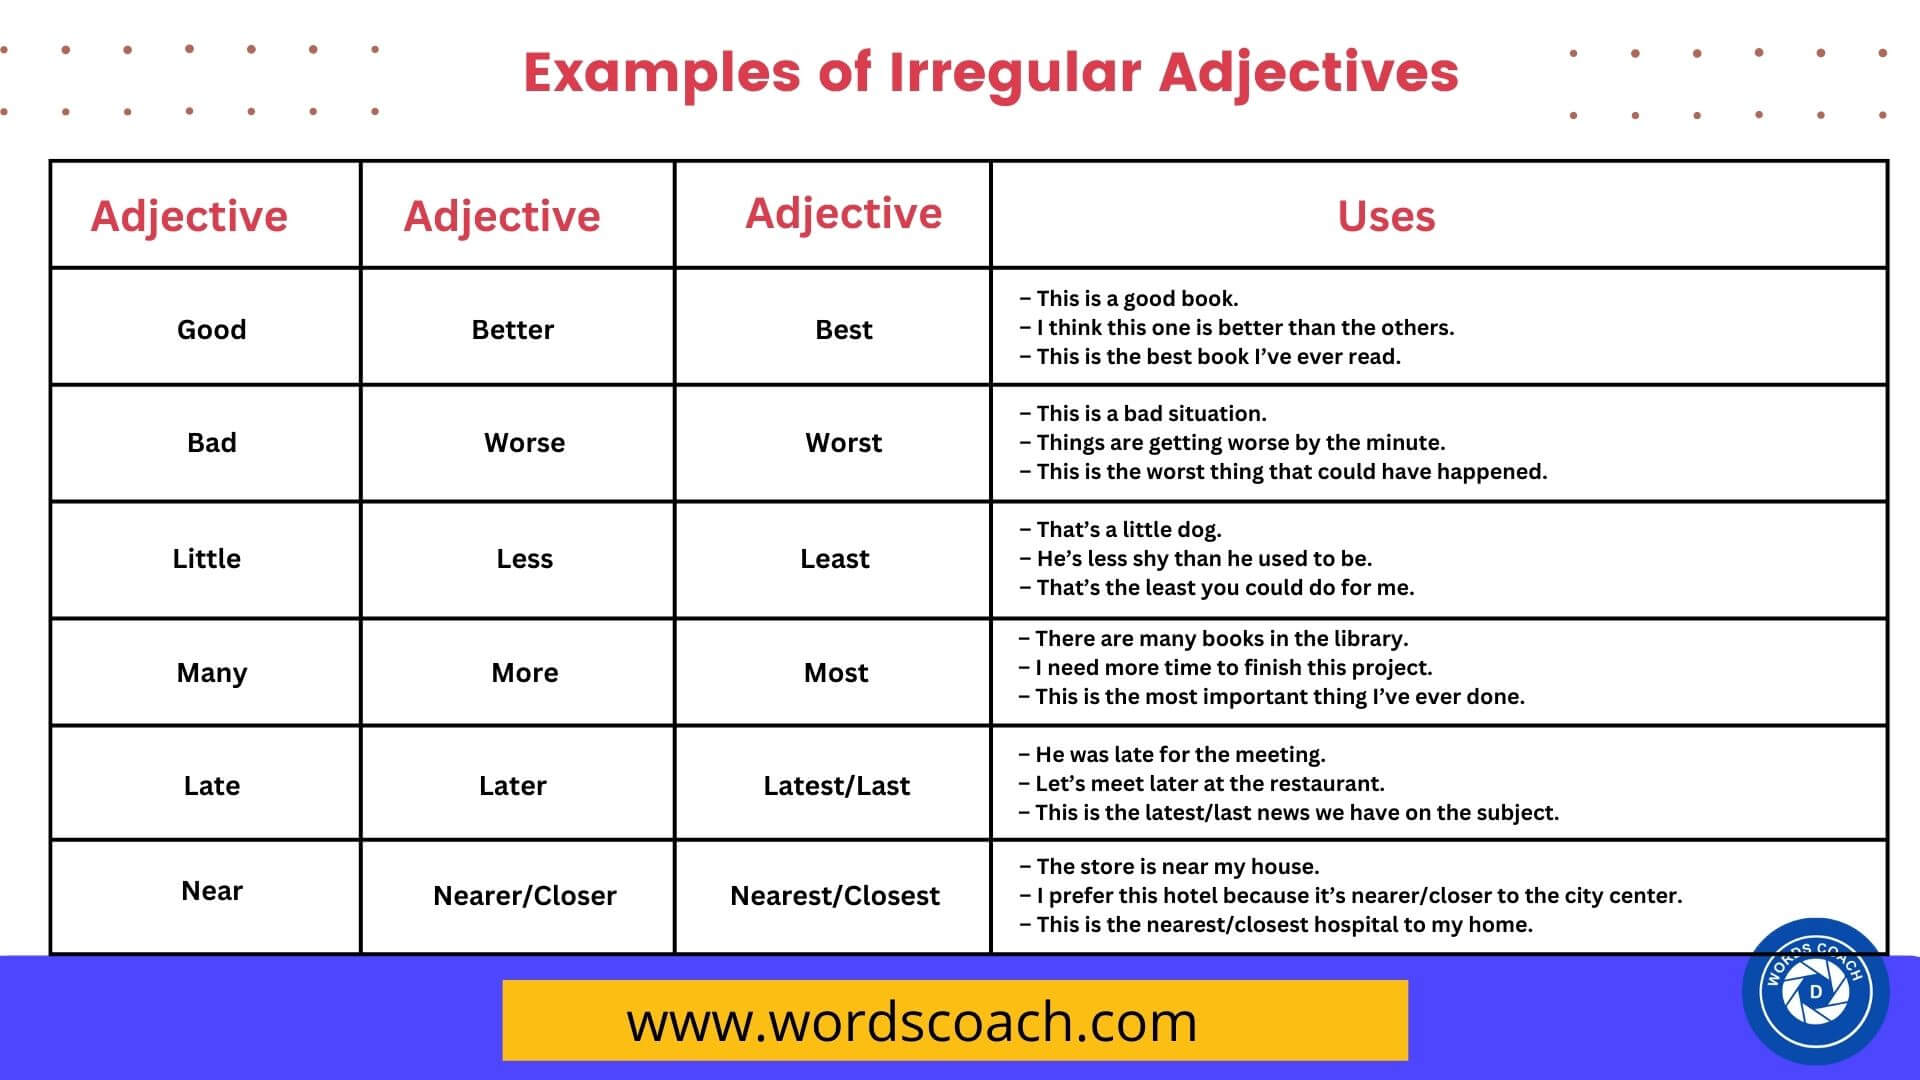 70-examples-of-irregular-adjectives-in-english-word-coach